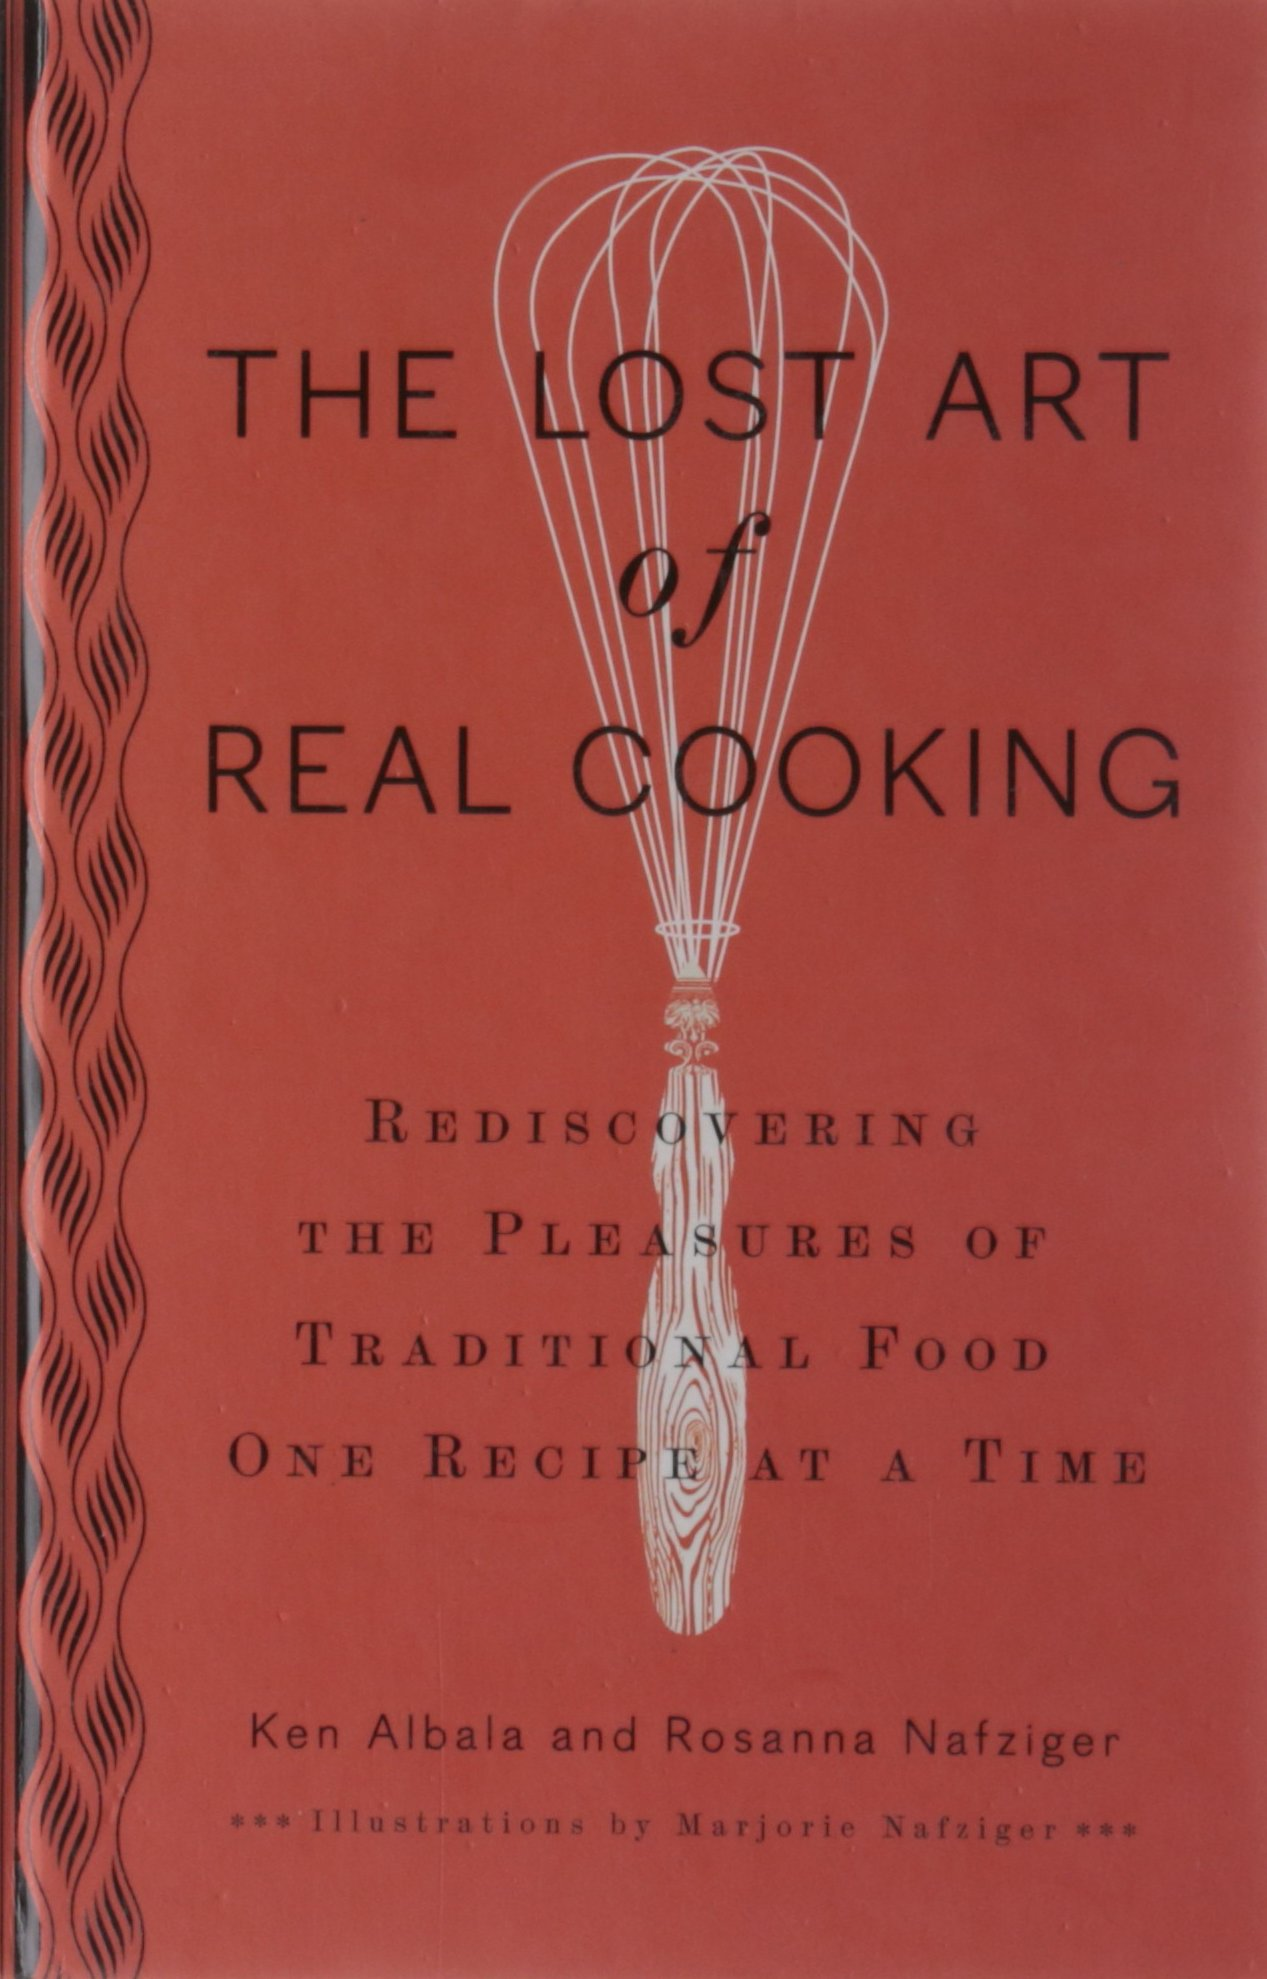 The Lost Art of Real Cooking